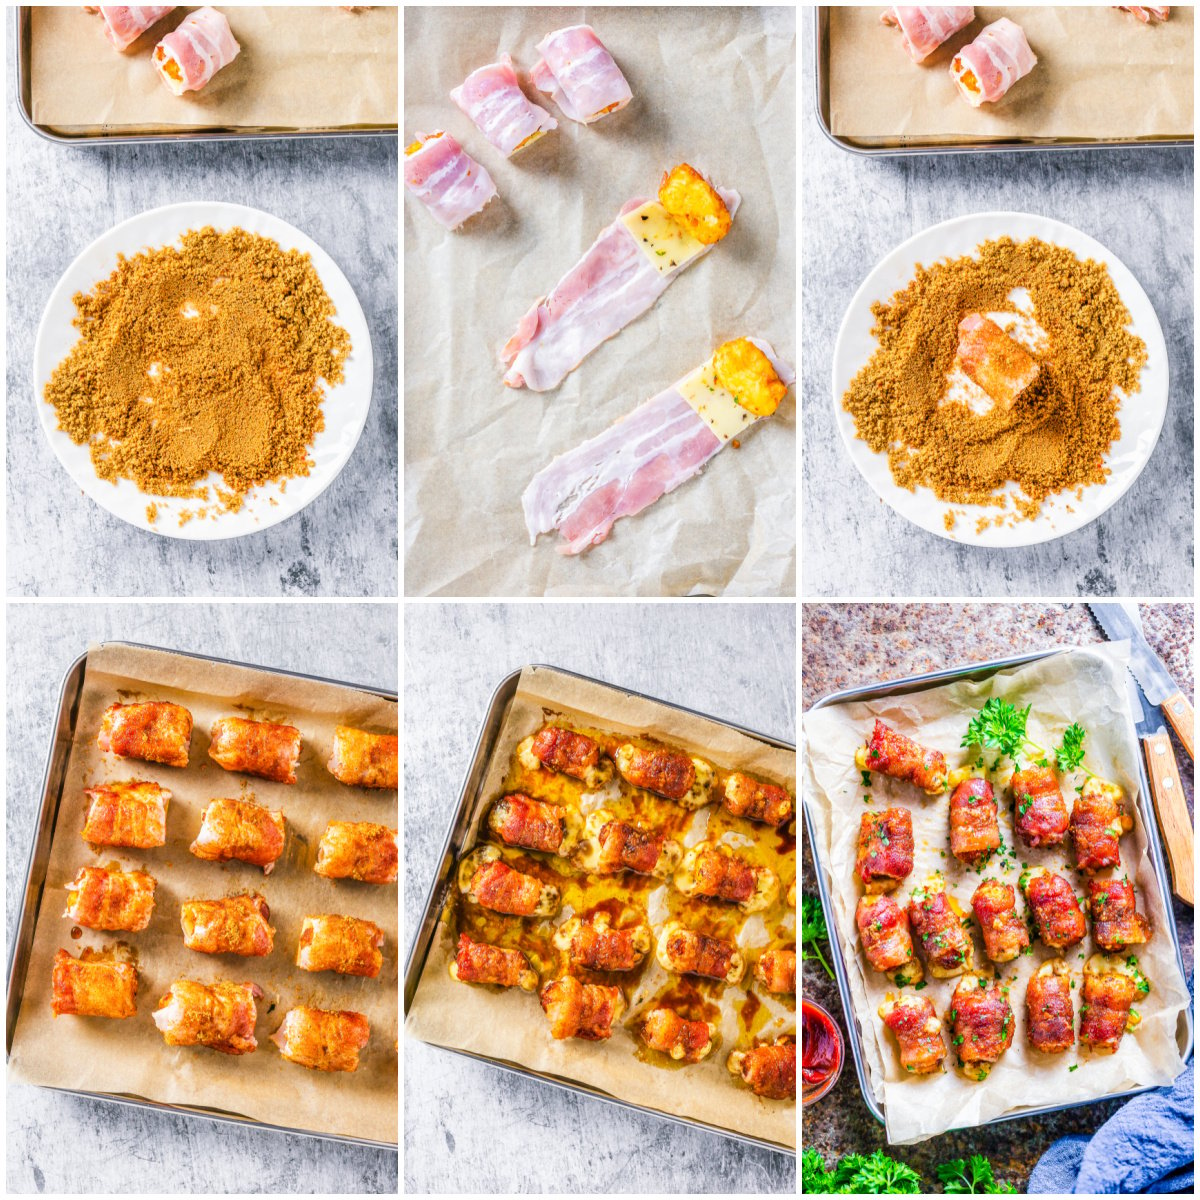 Step by step photos on how to make Sweet & Spicy Bacon Bombs.